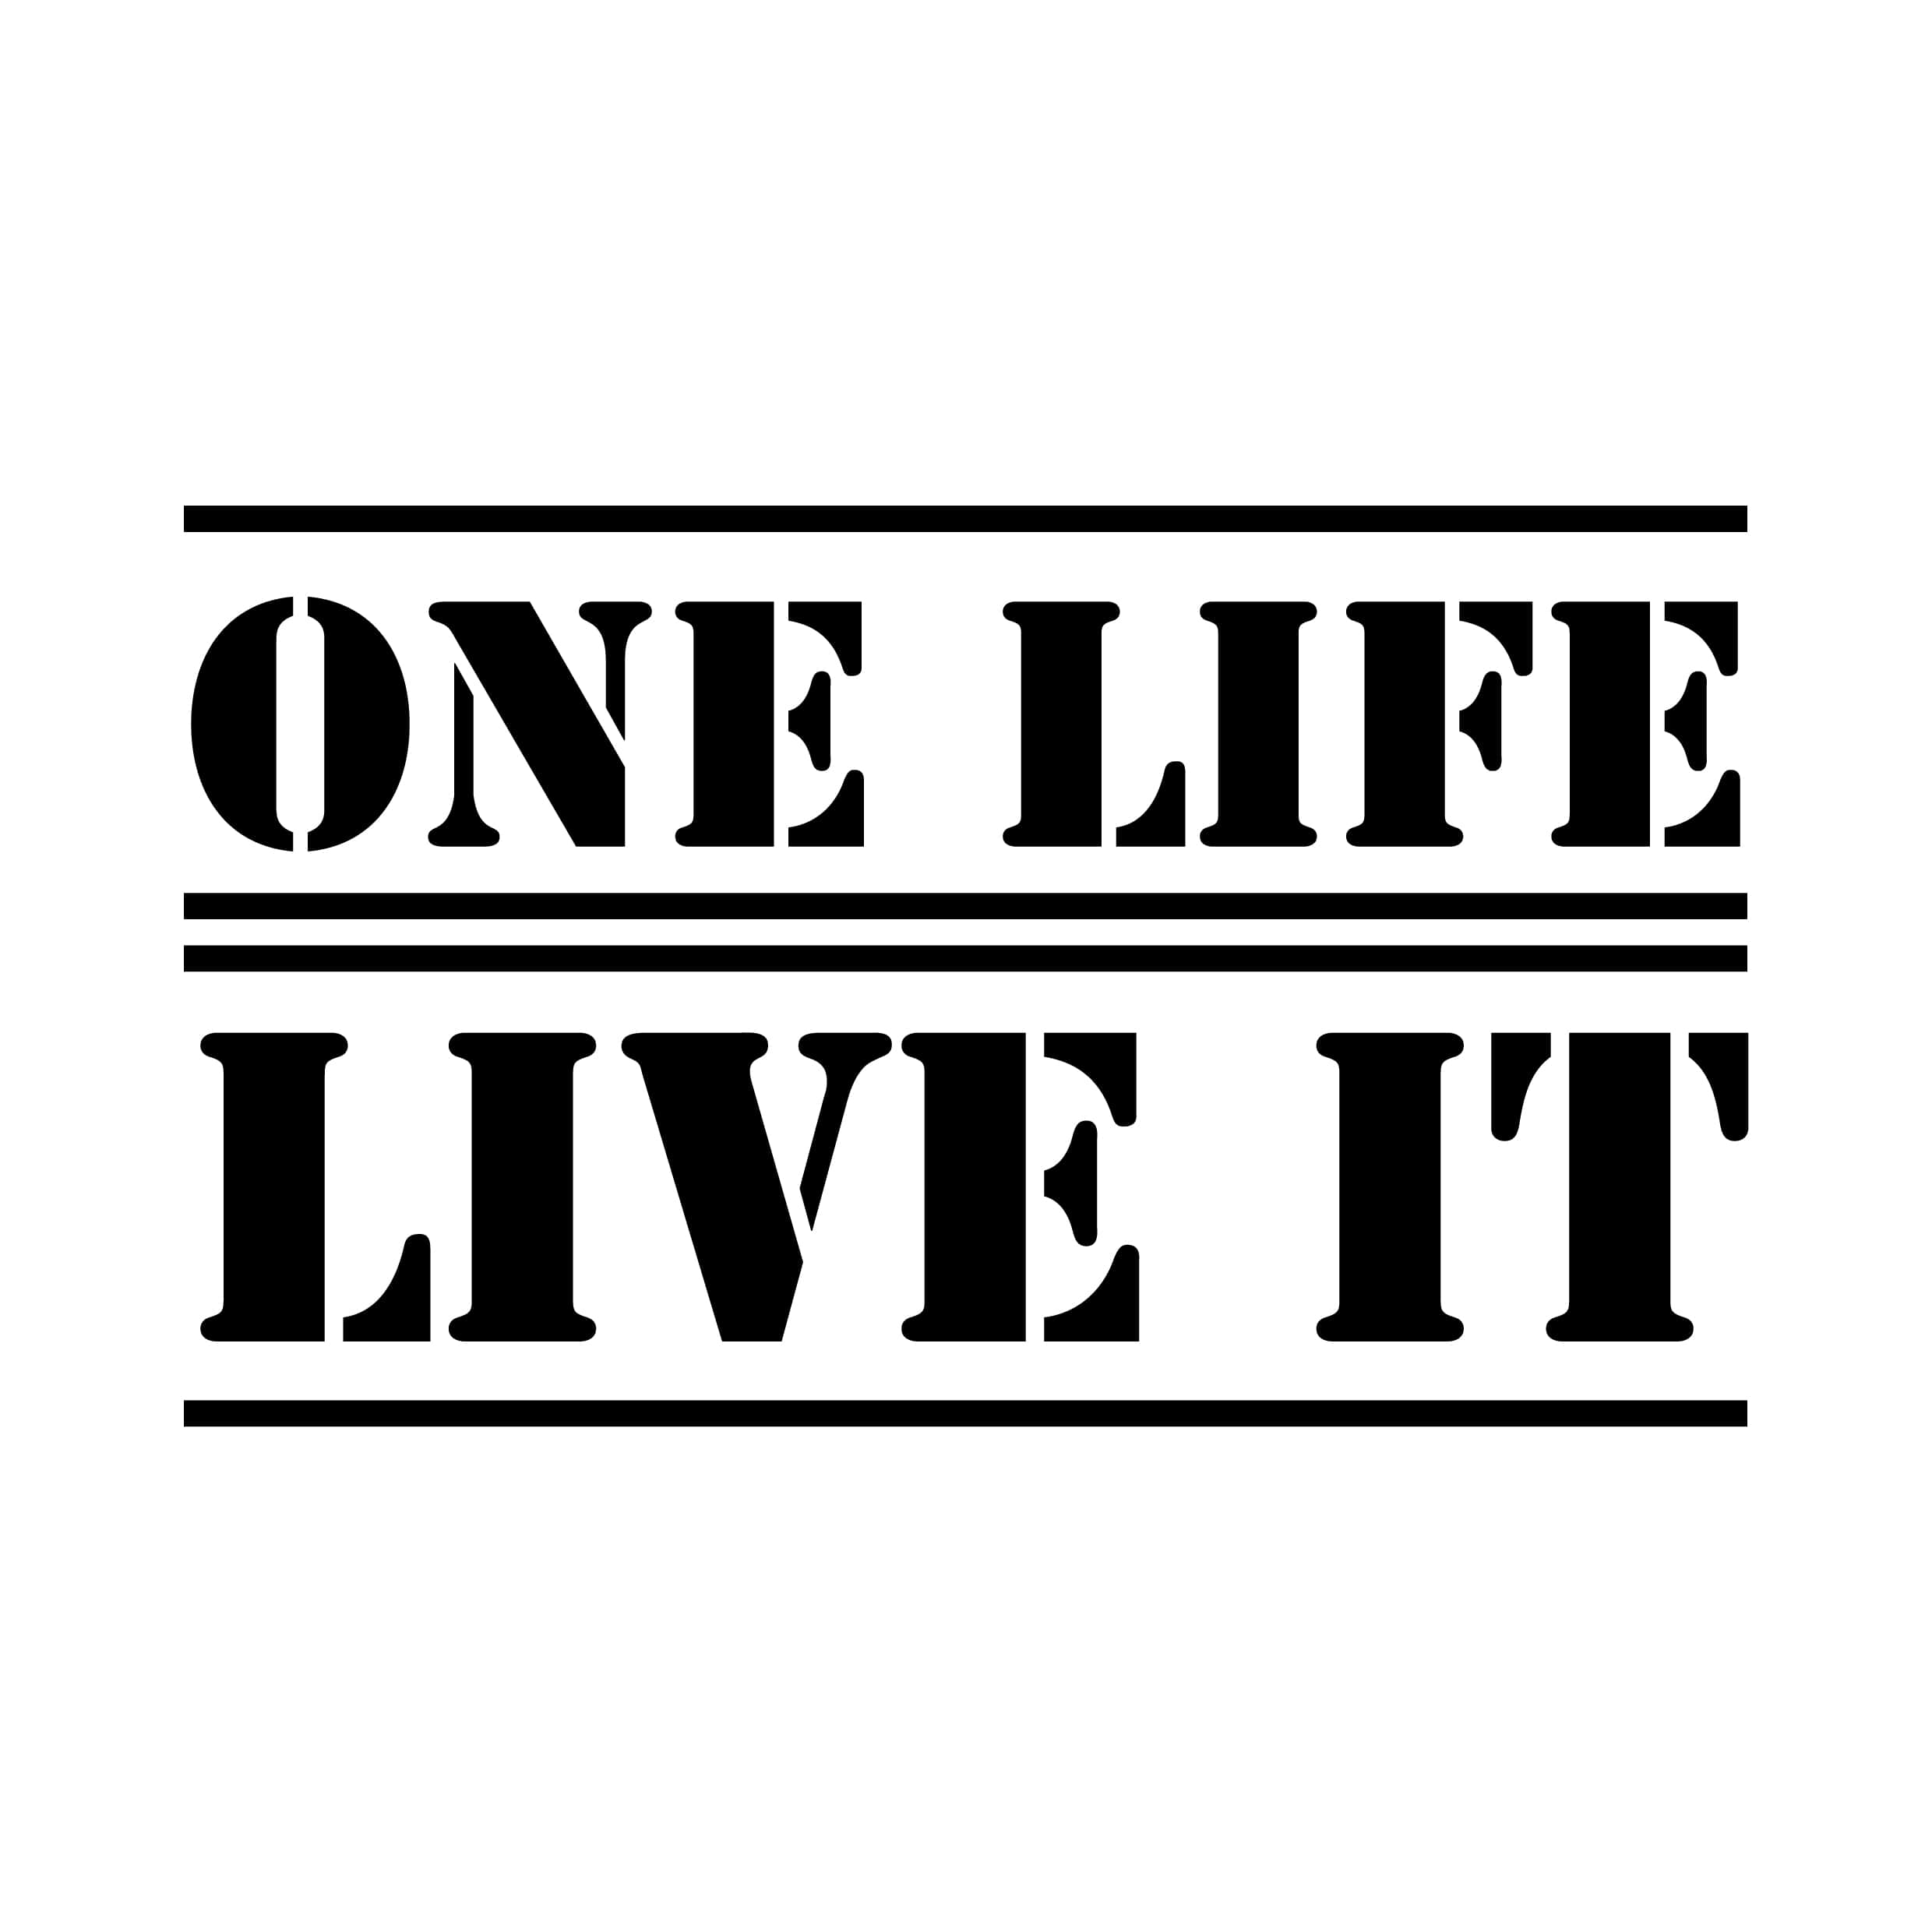 stickers-one-life-live-it-range-rover-ref26-autocollant-4x4-sticker-suv-off-road-autocollants-decals-sponsors-tuning-rallye-voiture-logo-min